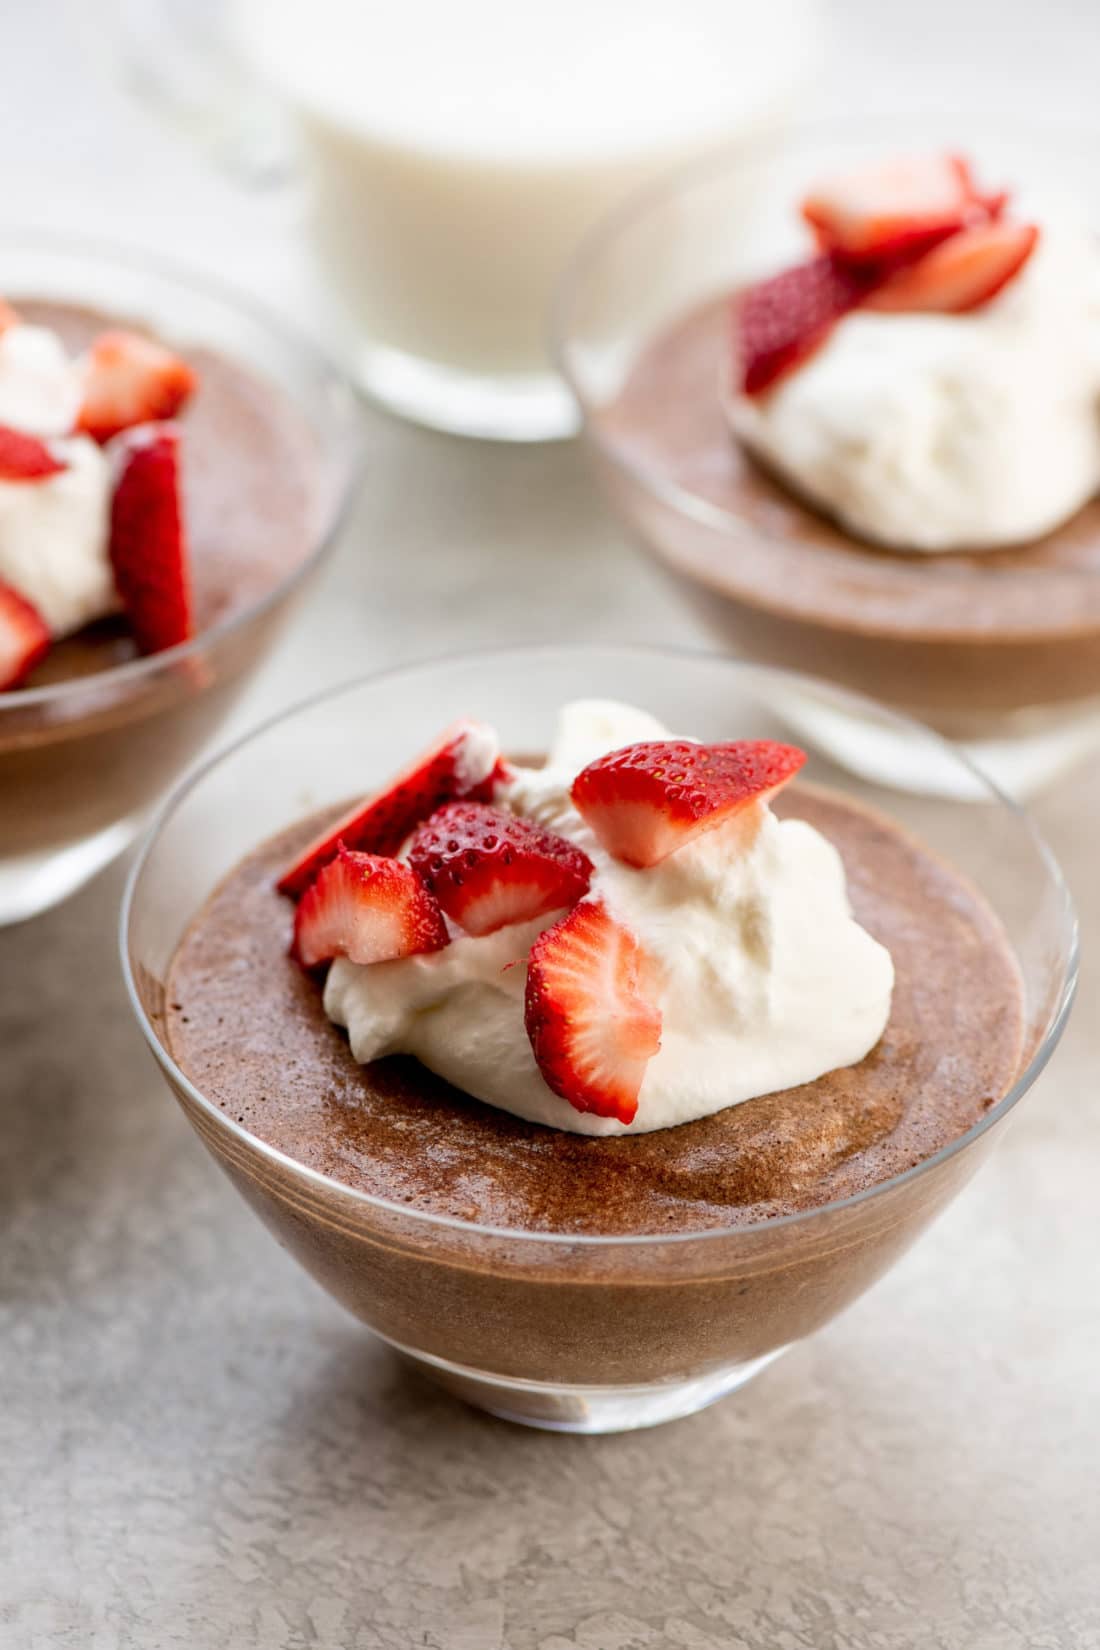 Dishes of Chocolate Mousse topped with whipped cream and strawberries.